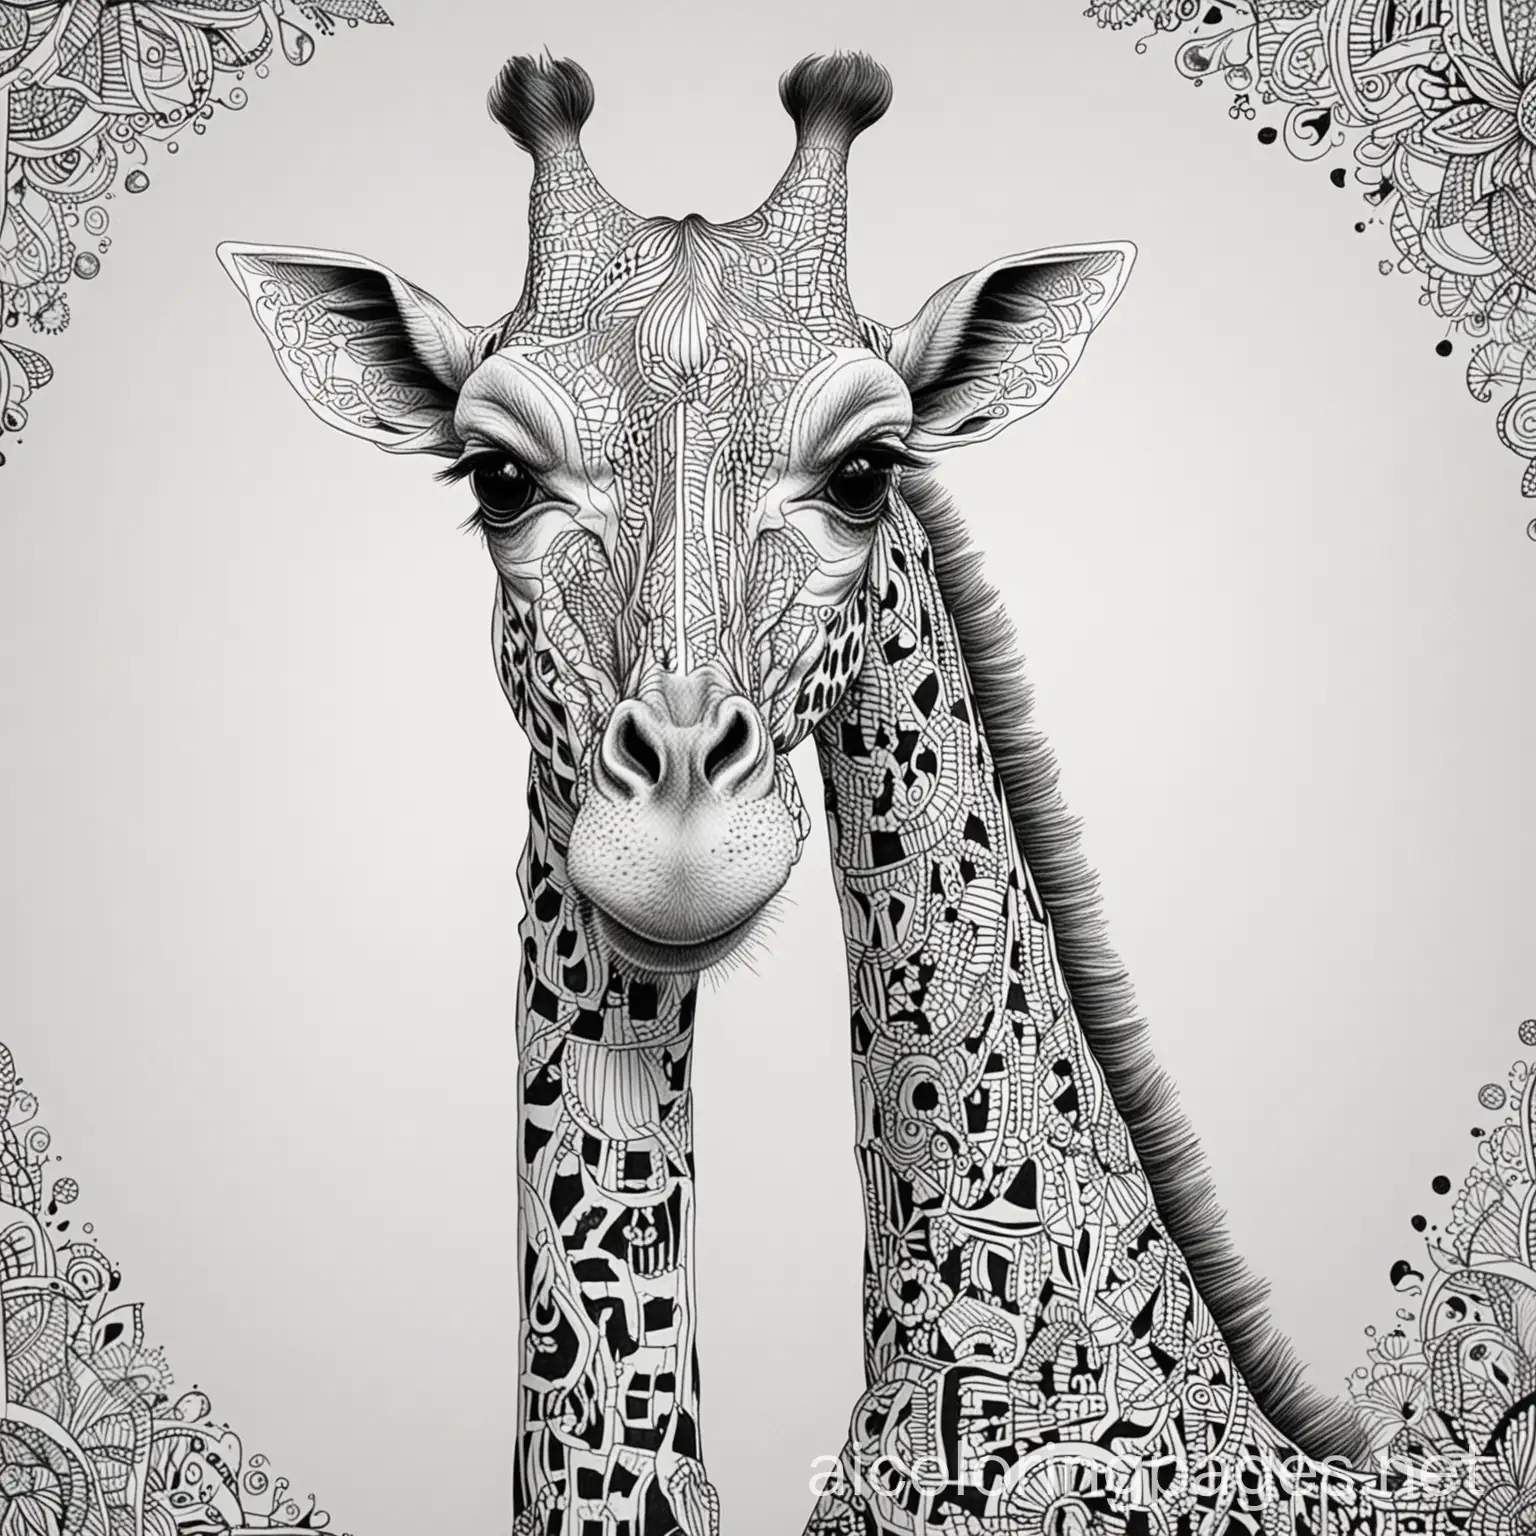 giraffe with zentangle patterns

, Coloring Page, black and white, line art, white background, Simplicity, Ample White Space. The background of the coloring page is plain white to make it easy for young children to color within the lines. The outlines of all the subjects are easy to distinguish, making it simple for kids to color without too much difficulty